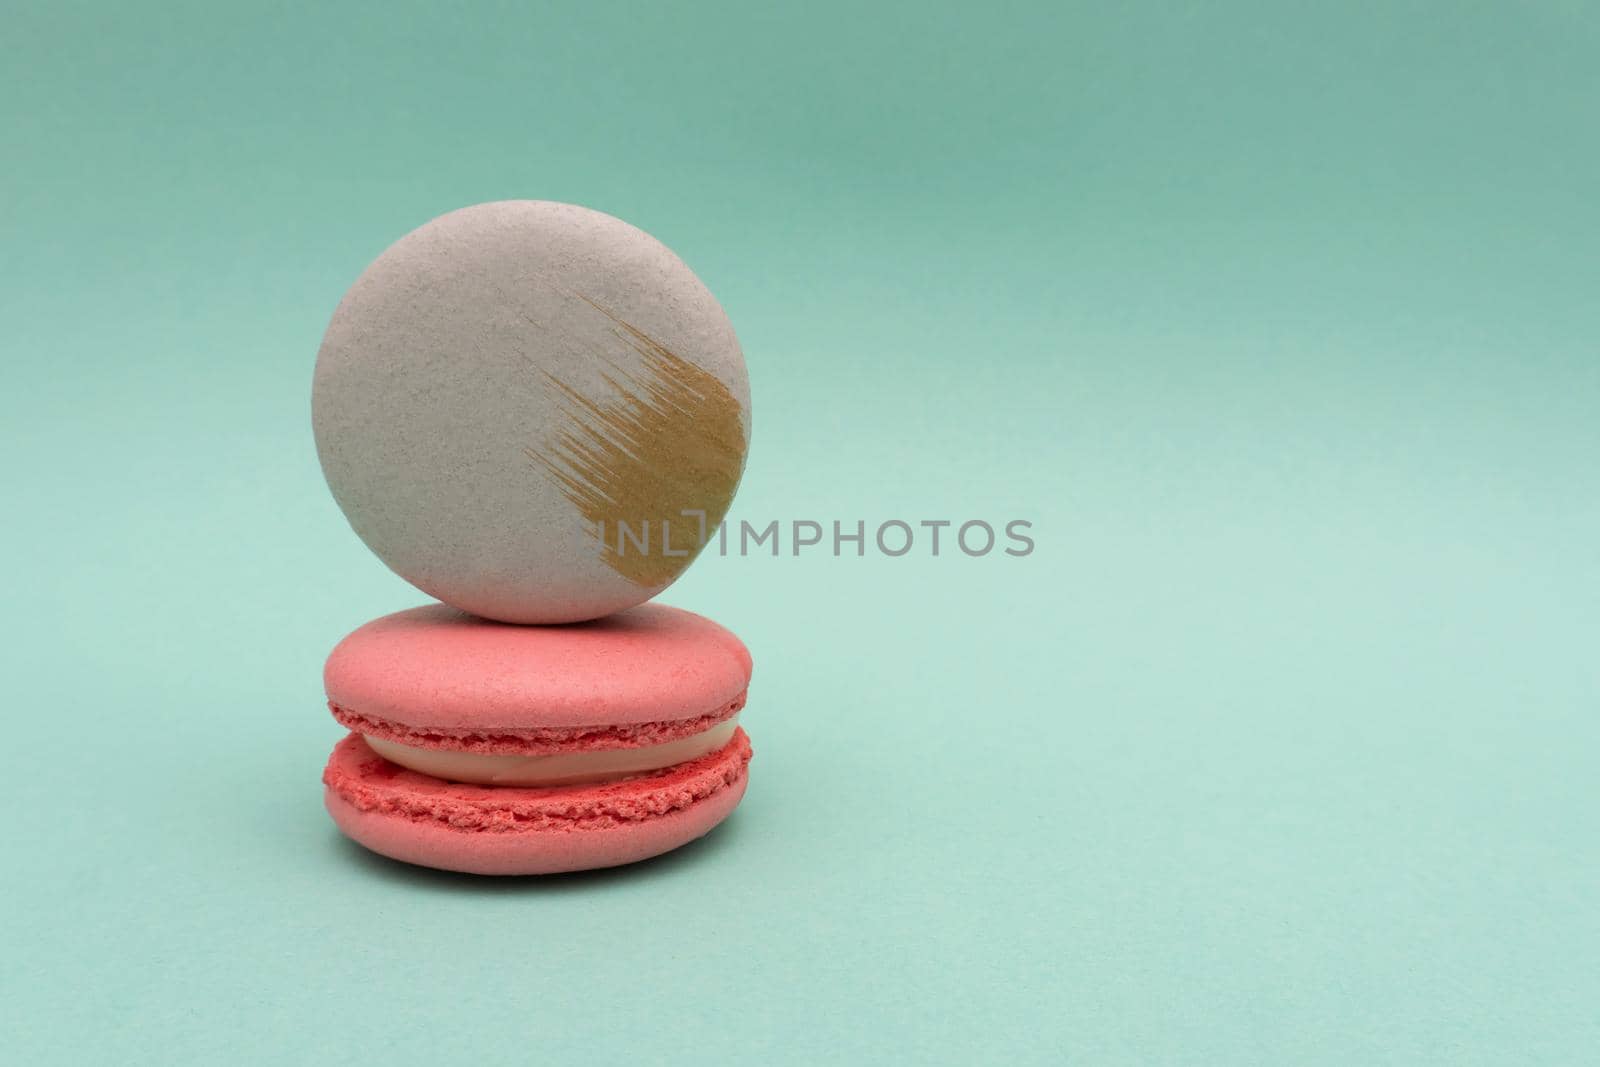 Grey grapefruit macaron stand on pink strawberry macaroon on mint or turquoise background, copy space, almond cookies, pastel colors